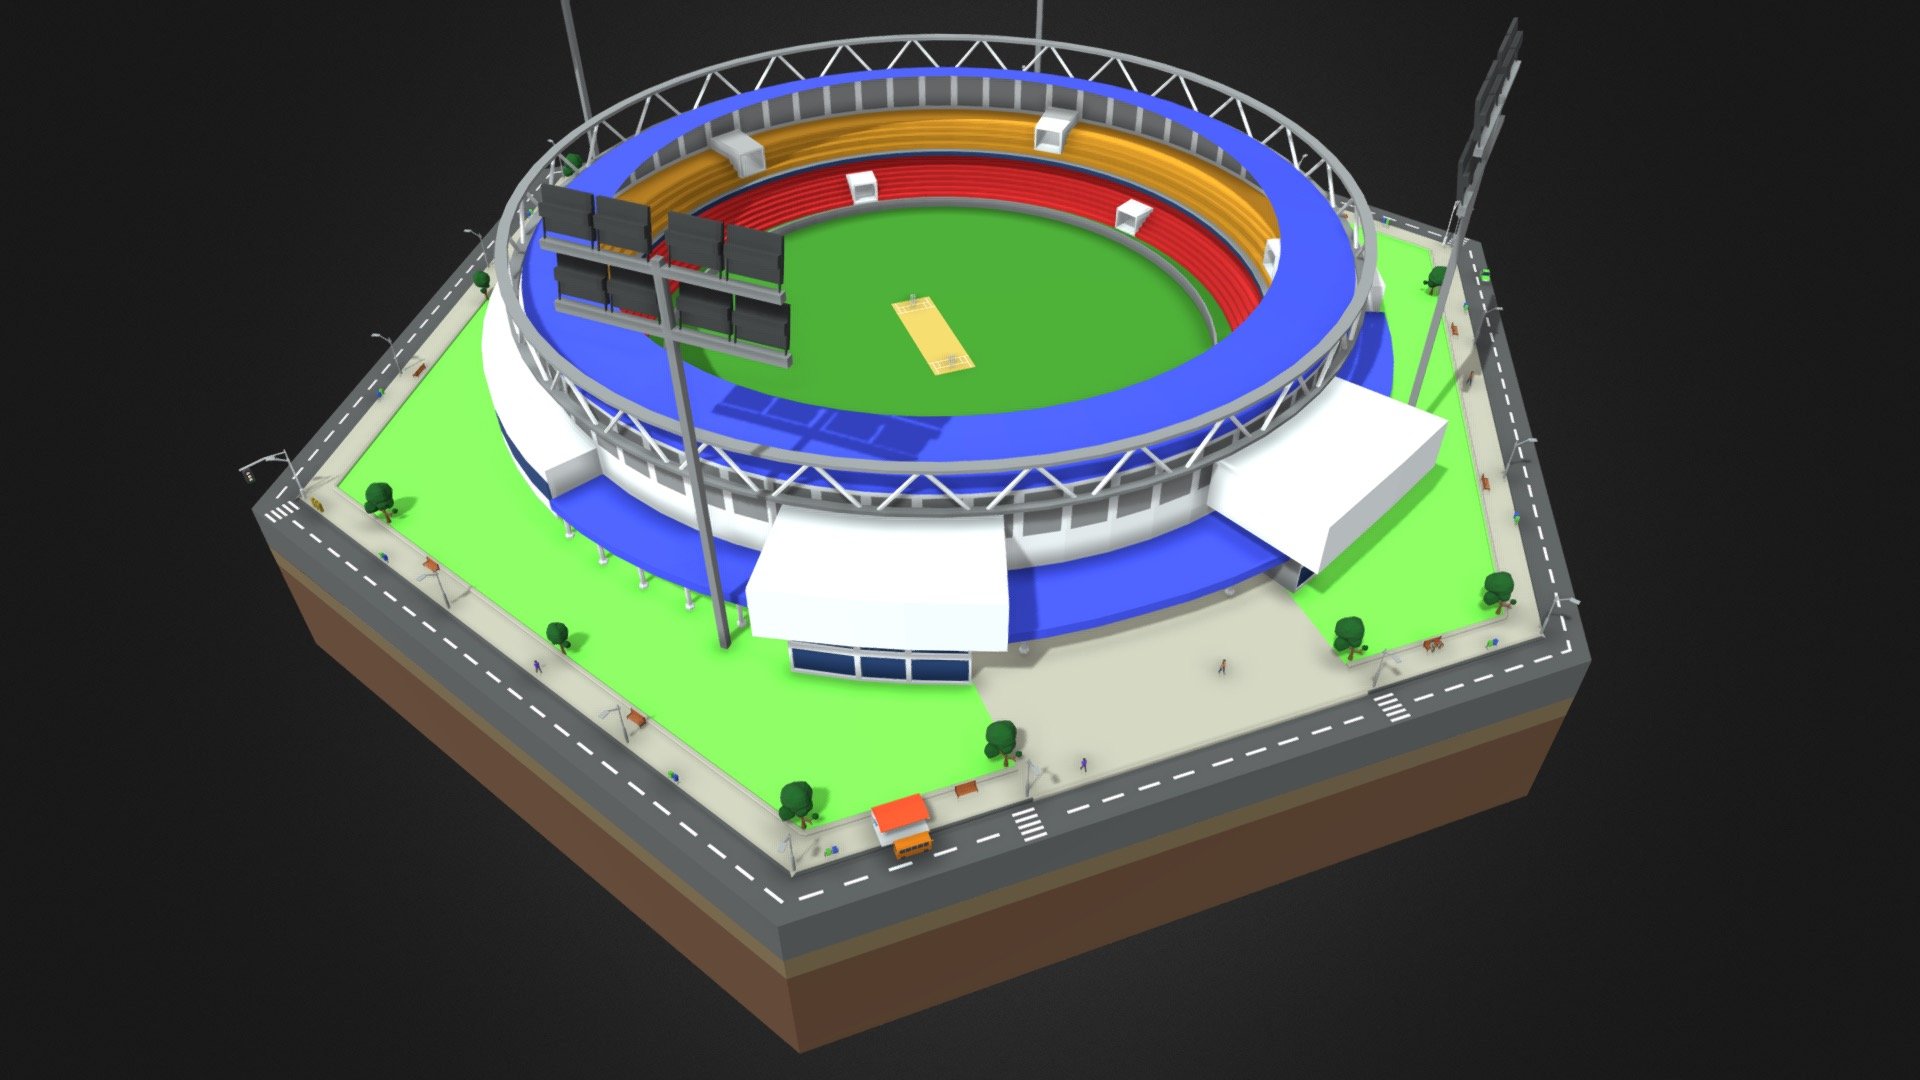 StreakByte Presenting Sport pack : 
Recently we have created 3D models of stadium pack where we have coverd 9 different stadiums( You will get 1 Stadium in this cost : Cricket Stadium) 




Basketball 

Baseball 

Cricket 

Football

Hockey 

Kabaddi 

Rugby 

Tennis 

Volleyball

You will get the Cricket Stadium 
For any quries , please feel to contact us : streakbyte@gmail.com - Cricket Stadium - Buy Royalty Free 3D model by StreakByte 3d model